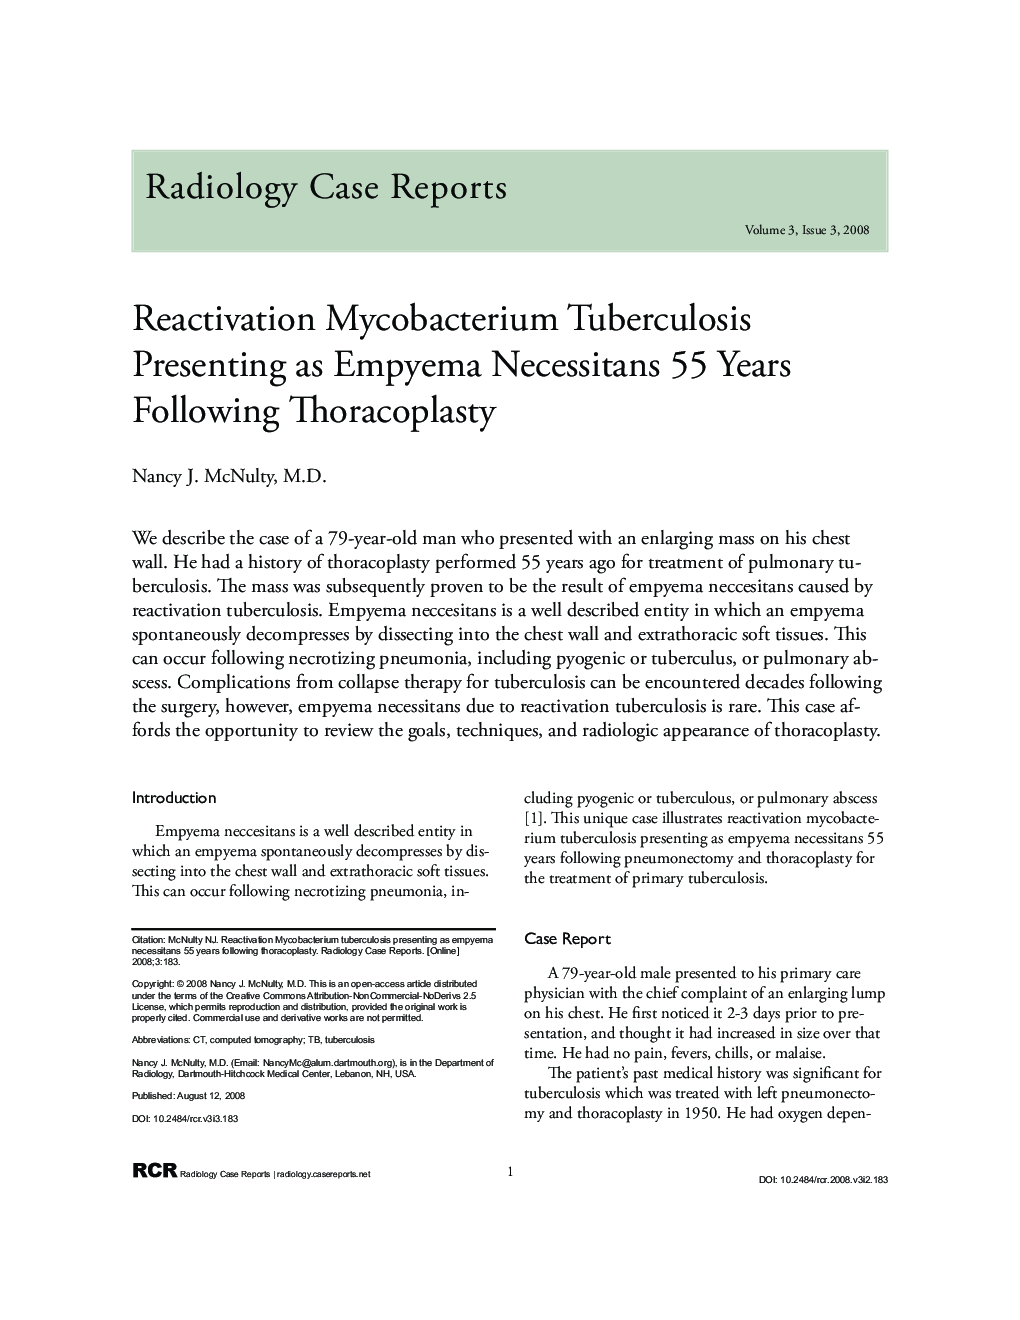 Reactivation Mycobacterium Tuberculosis Presenting as Empyema Necessitans 55 Years Following Thoracoplasty